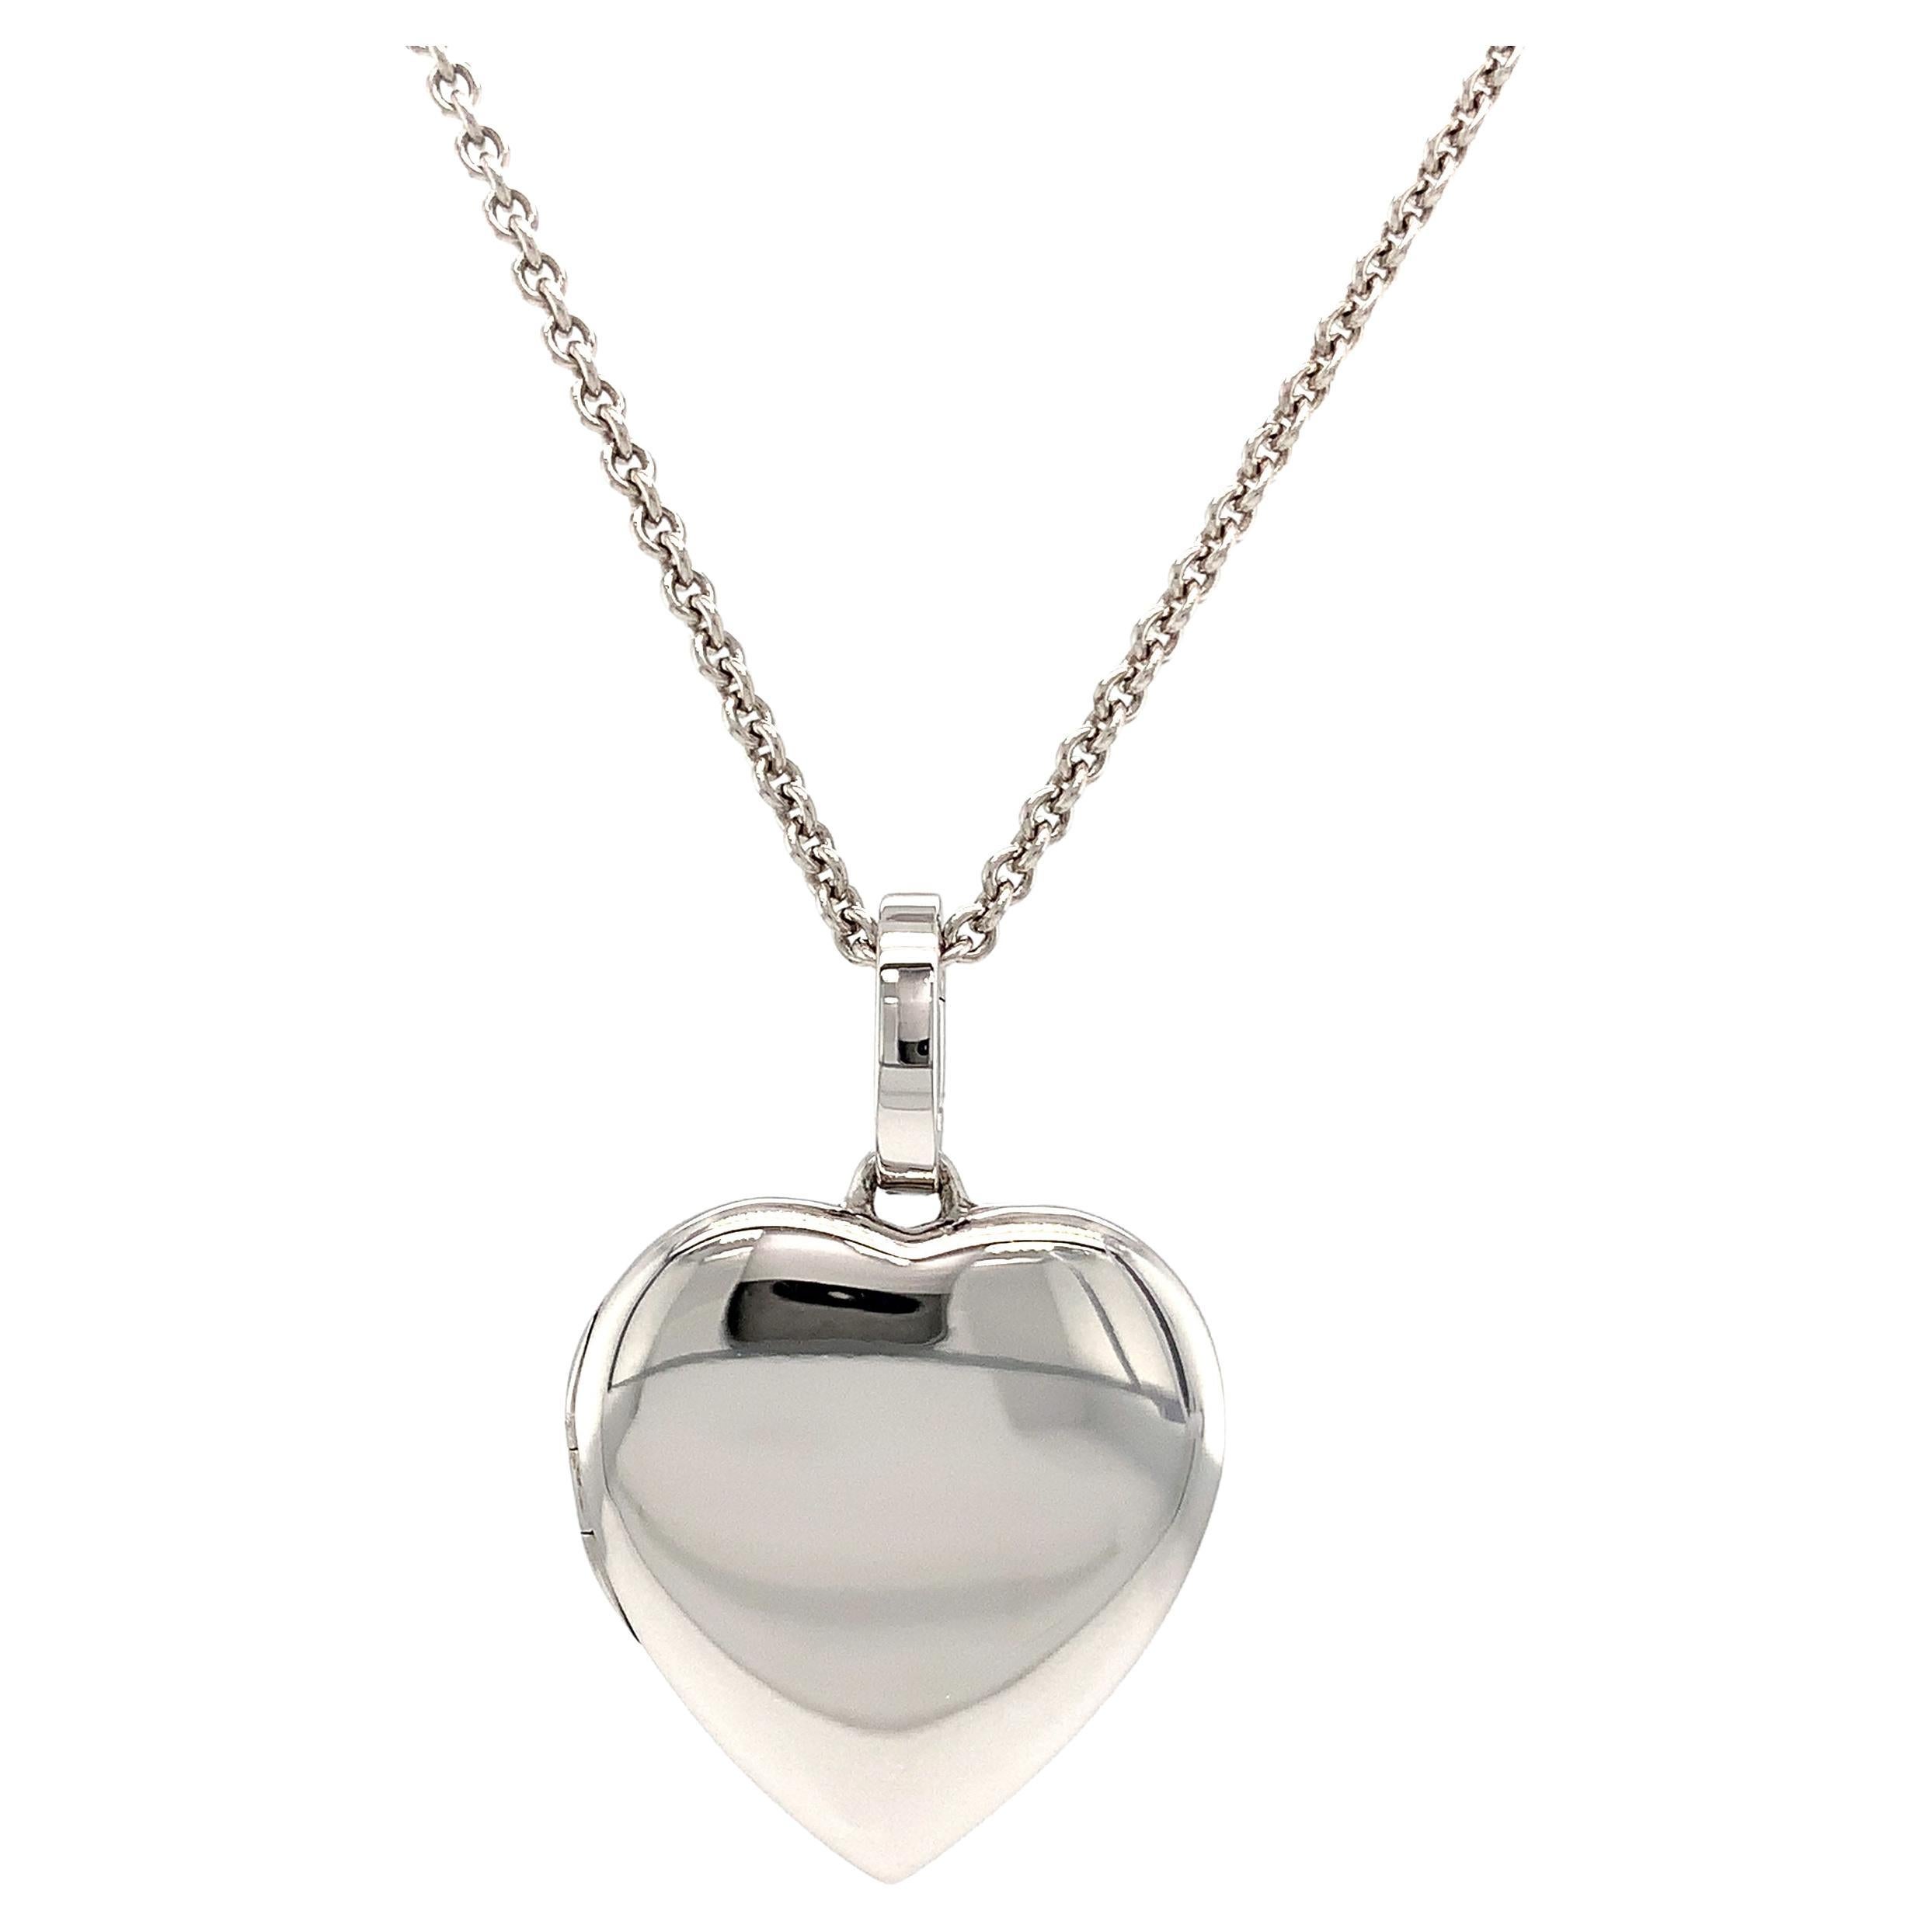 Heart Shaped Locket Pendant Necklace - 18k Polished White Gold - 23.0 x 25.0 mm For Sale